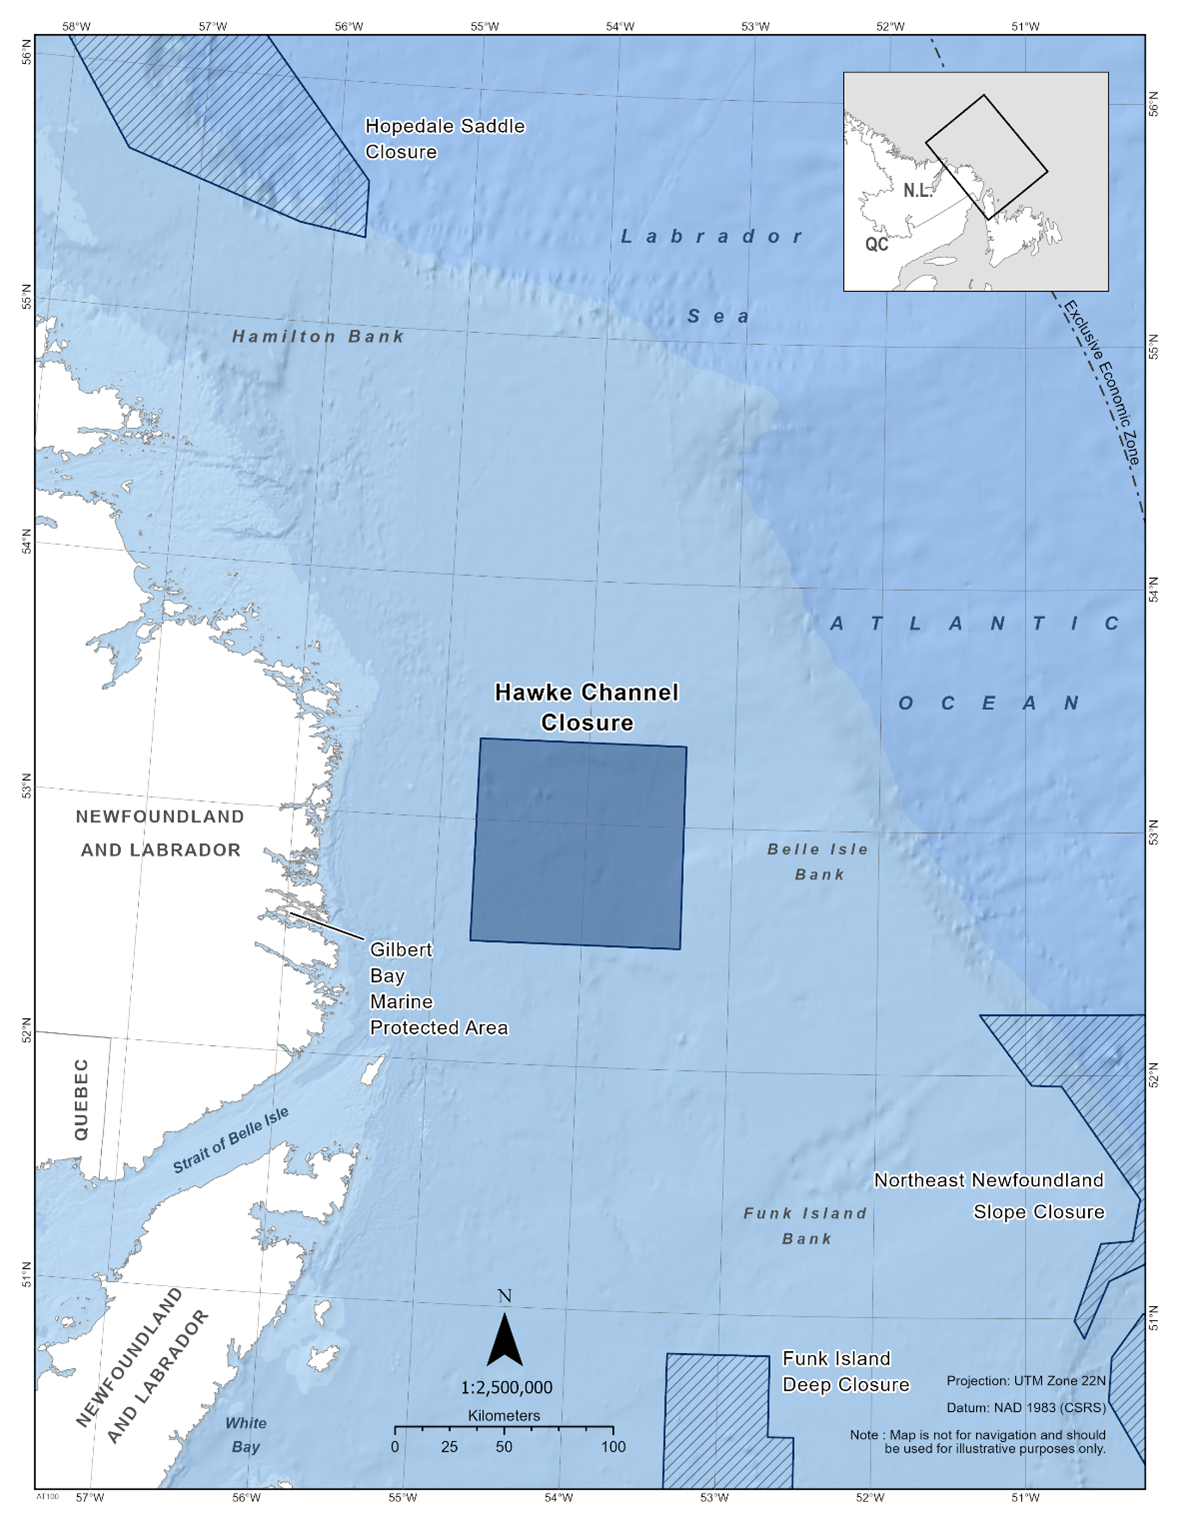 Map of the Hawke Channel Closure in dark blue. The map also includes the other marine refuges nearby with dark blue diagonal lines (Hopedale Saddle Closure, Funk Island Deep Closure, Northeast Newfoundland Slope Closure). 